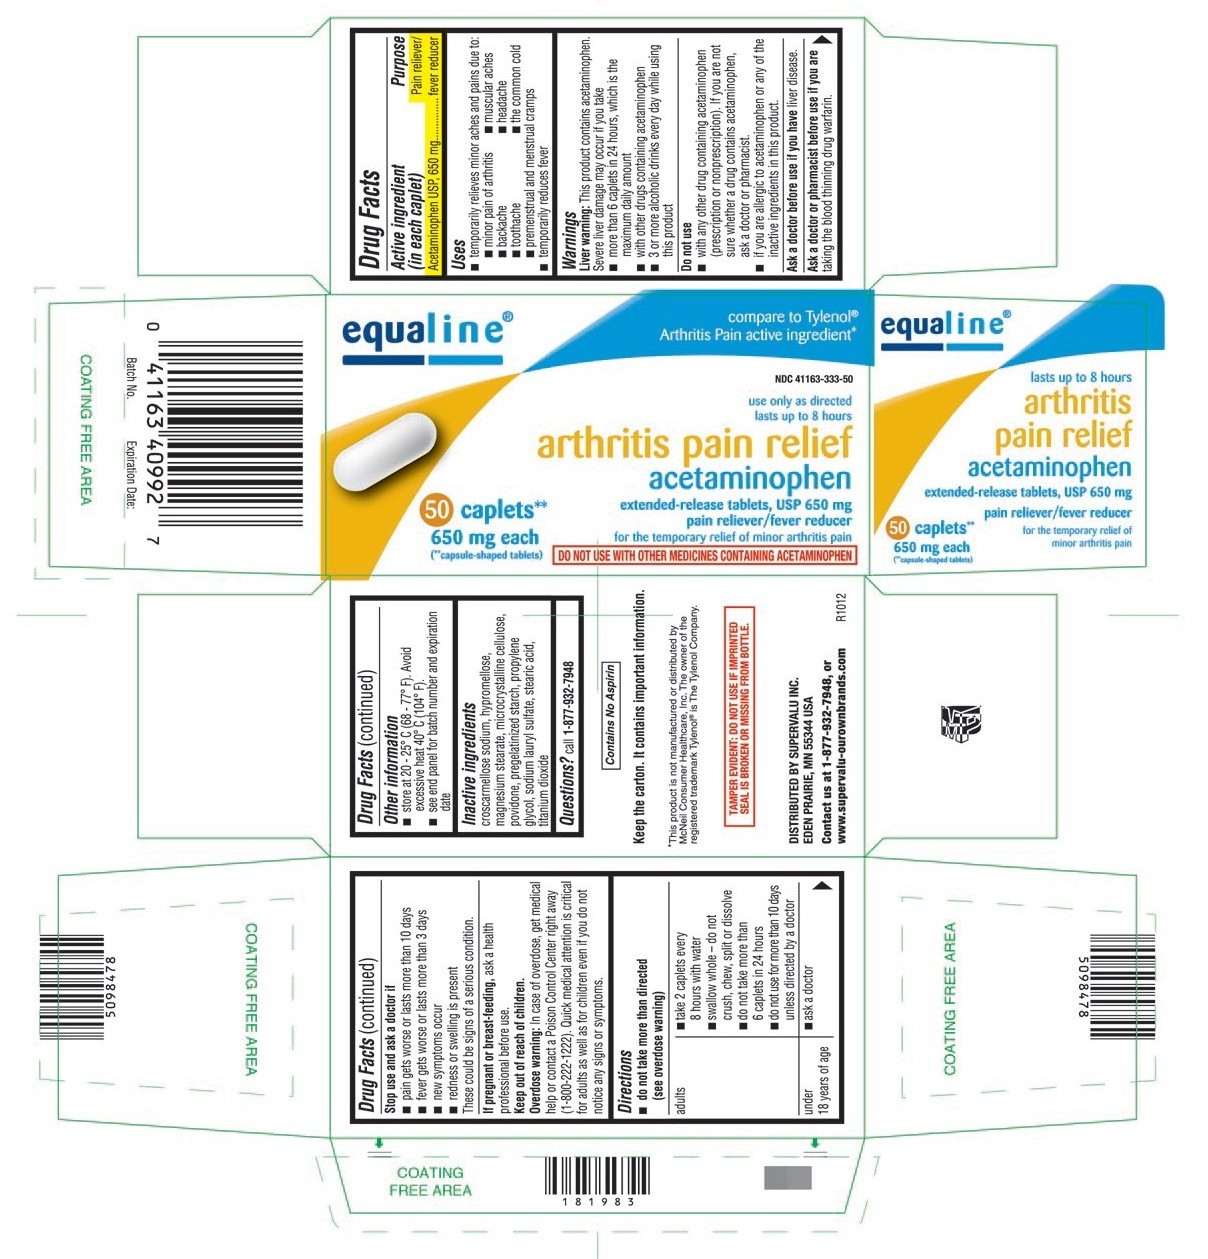 This is the 50 count bottle carton label for Equaline Acetaminophen extended-release tablets, USP 650 mg.